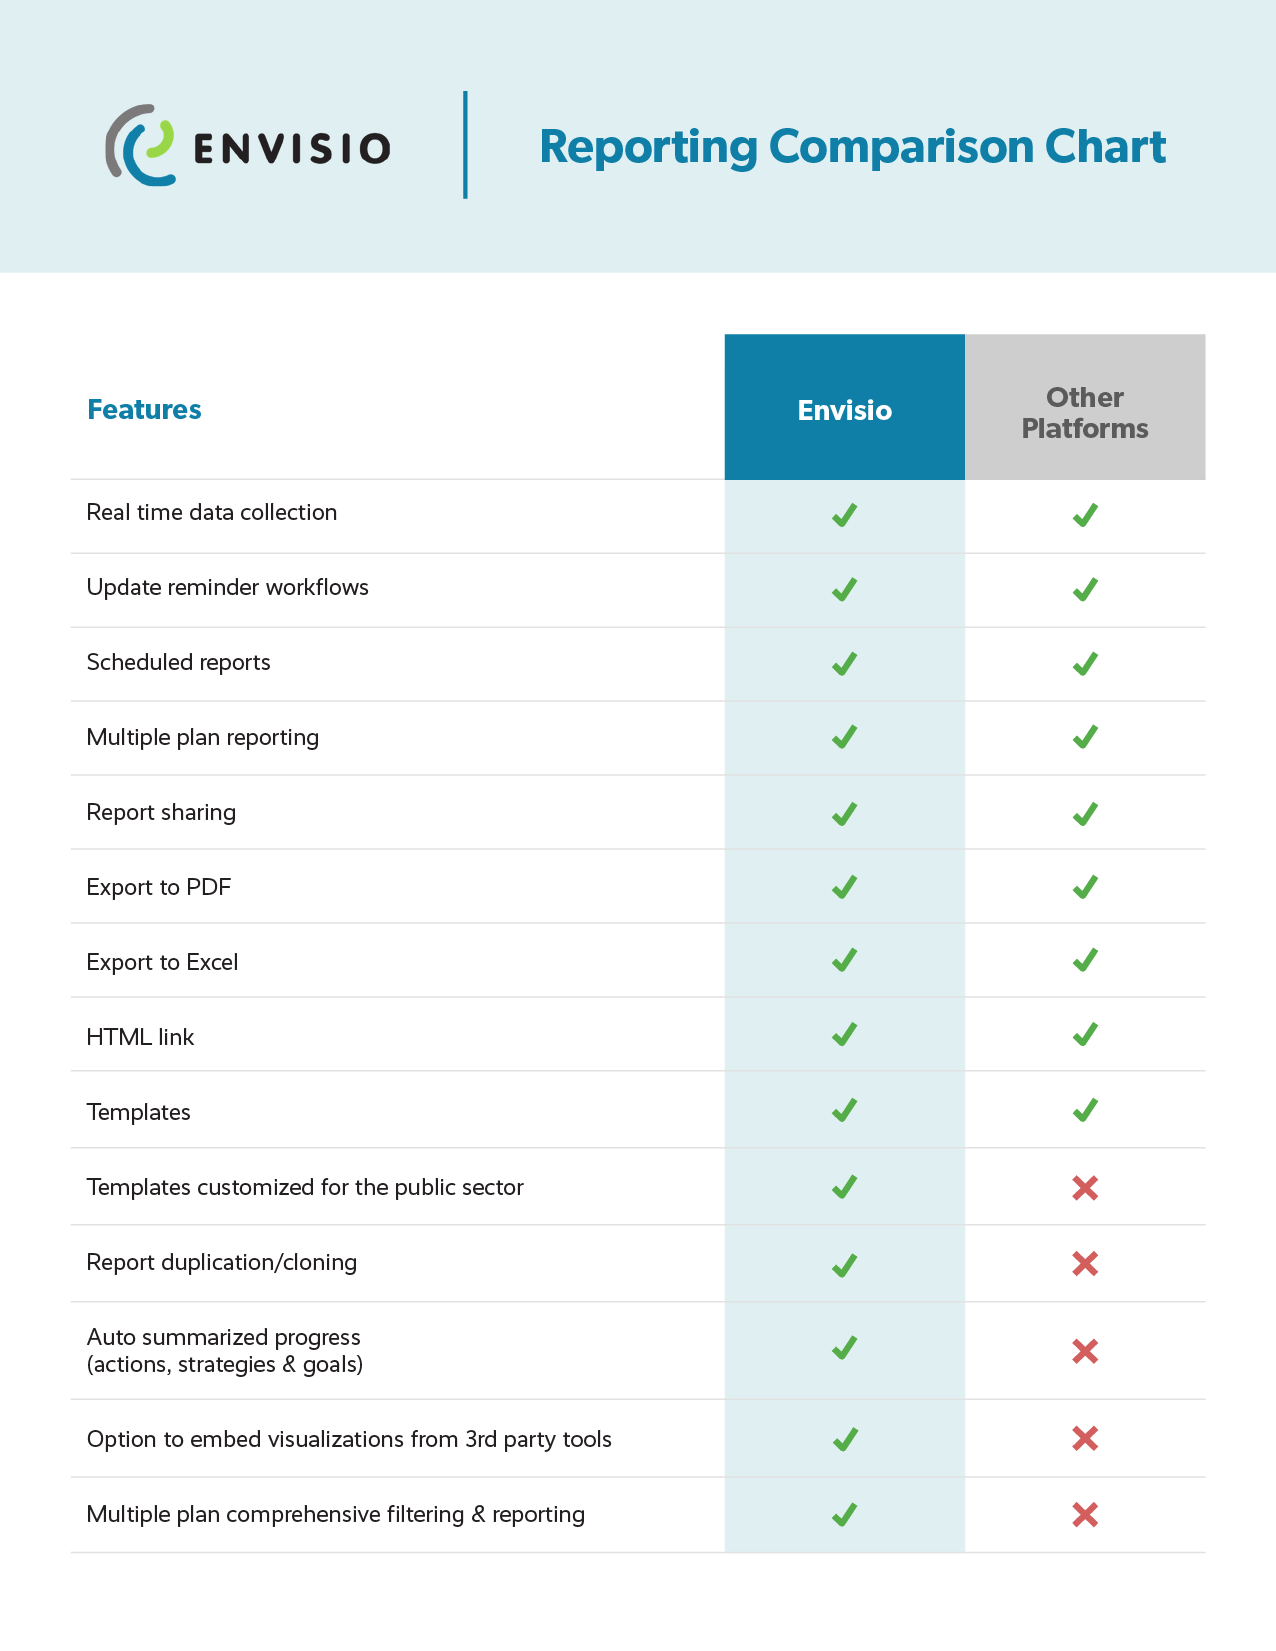 Screenshot of a management reporting software comparison chart